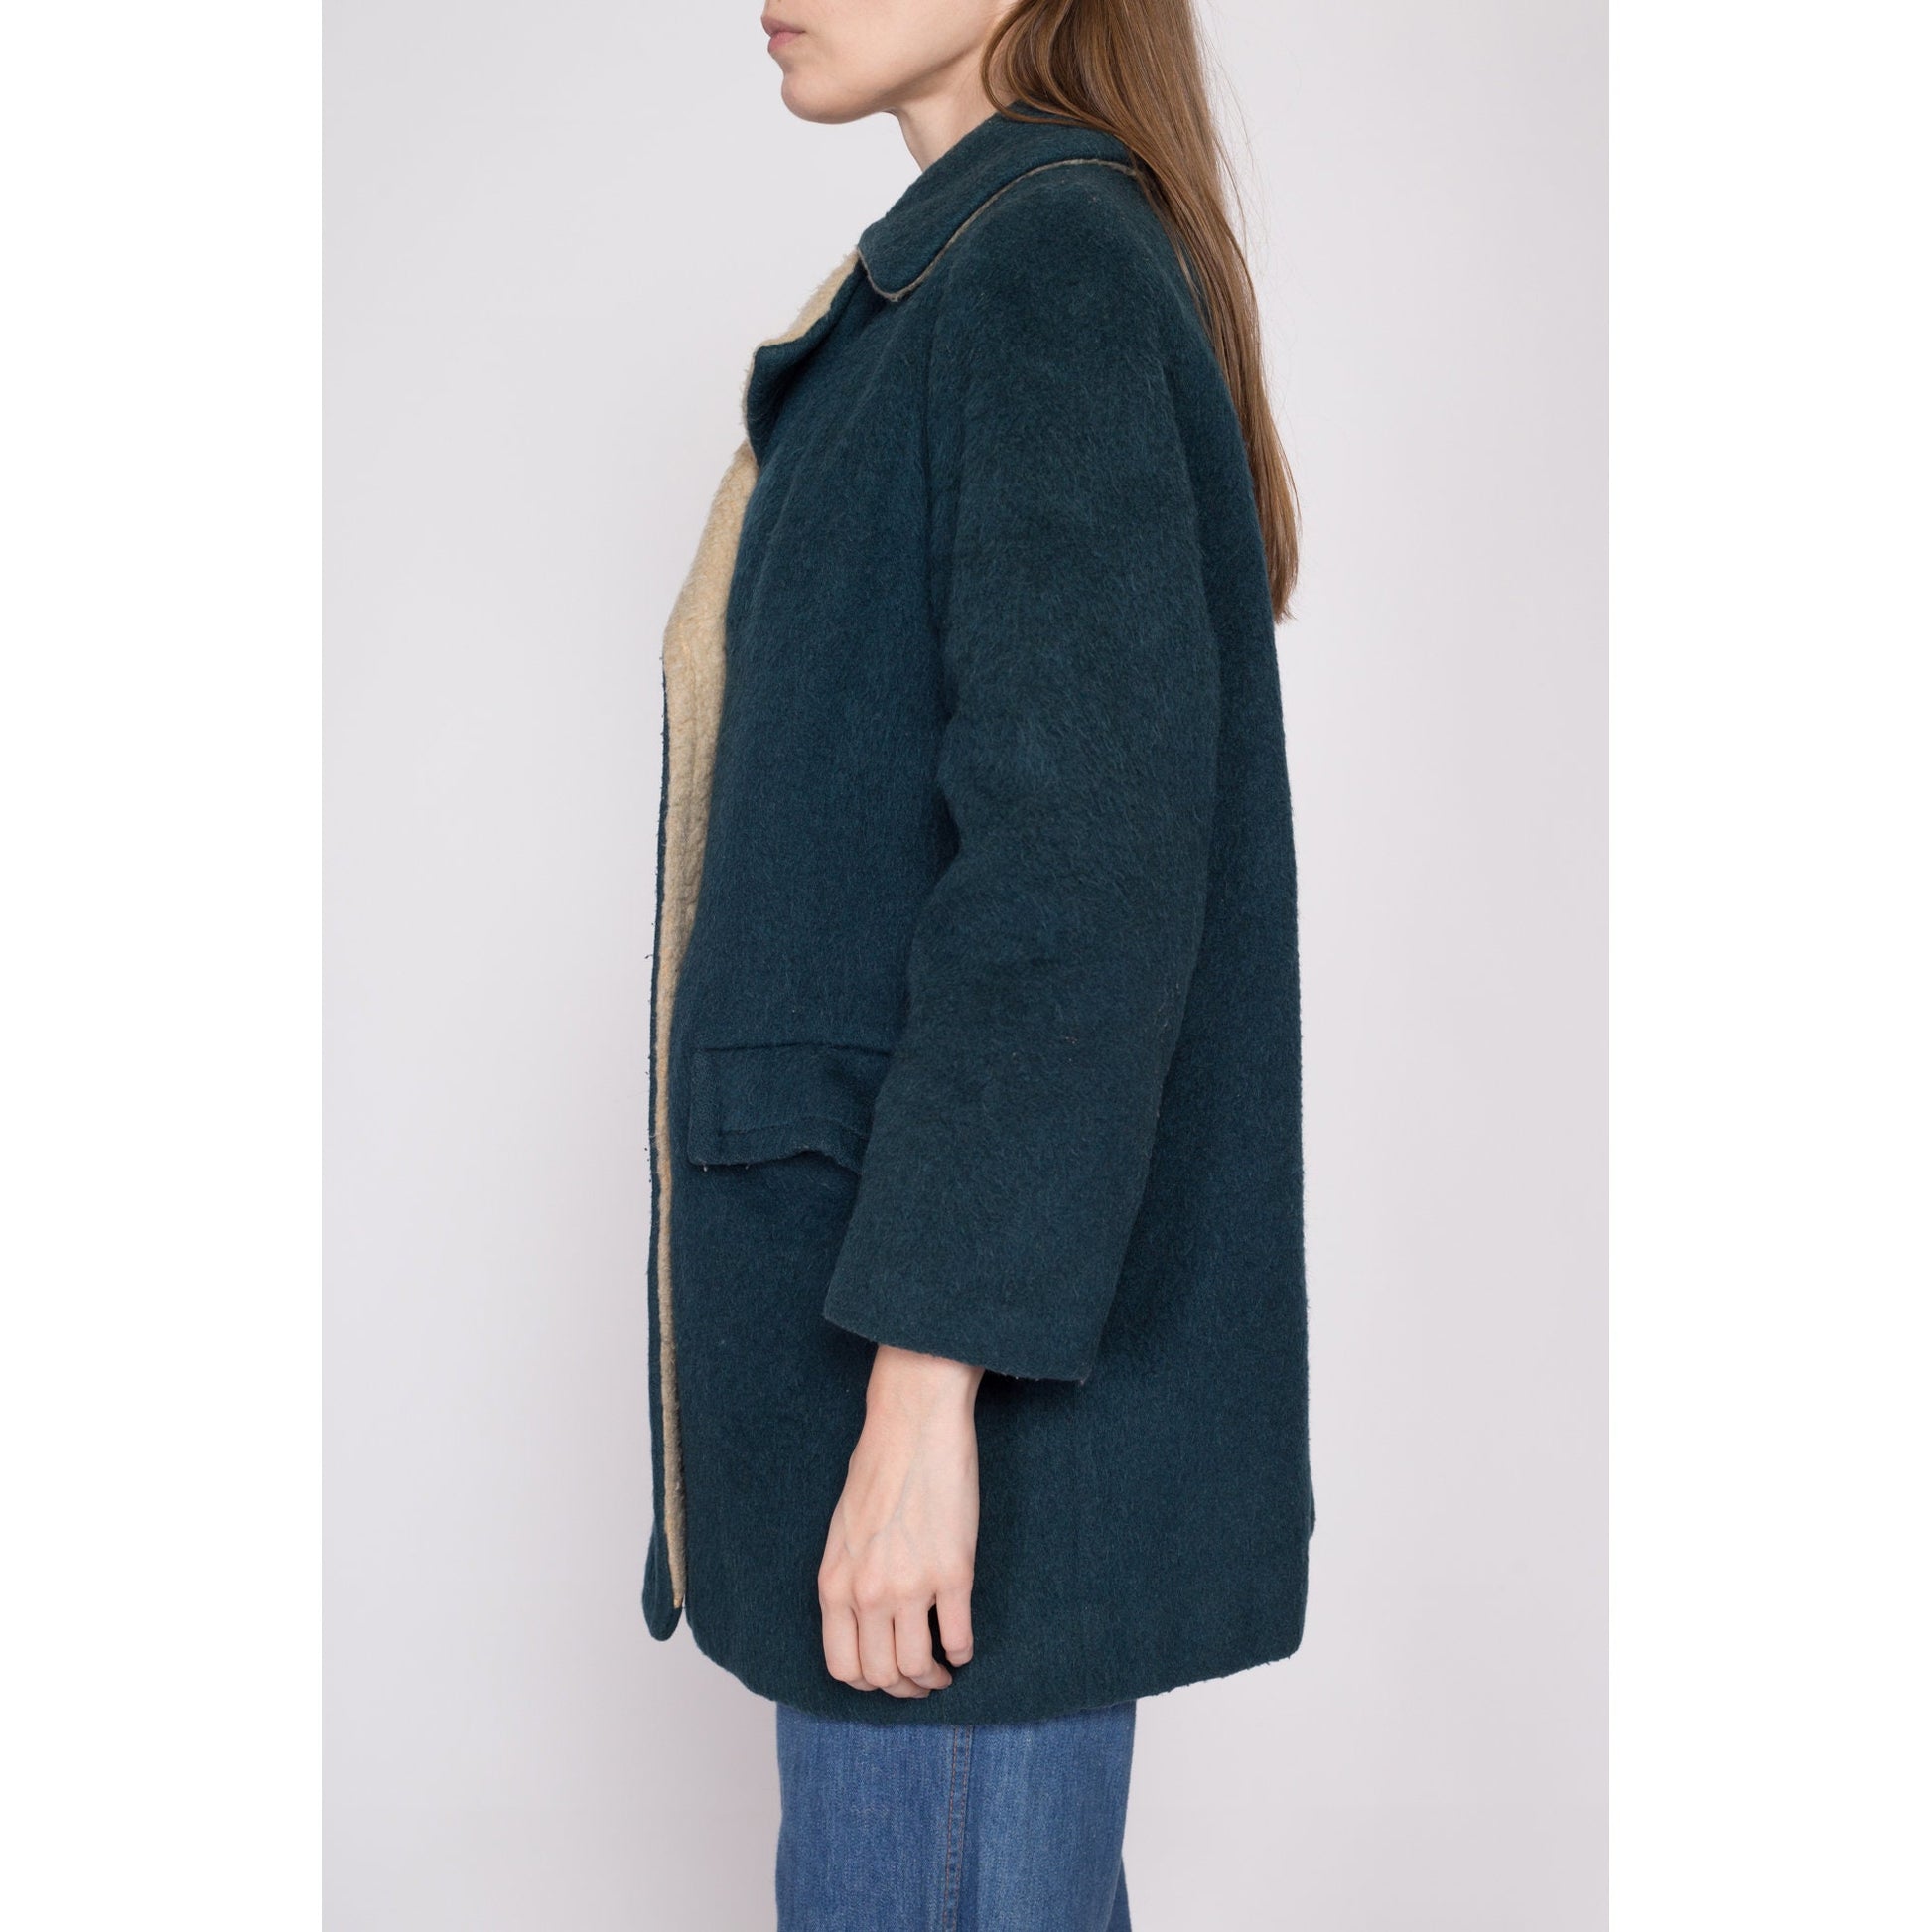 S-M| 60s 70s Emerald Green Double Breasted Coat - Petite Small to Medium | Vintage Mod Preppy Two Tone Wool Shearling Winter Jacket